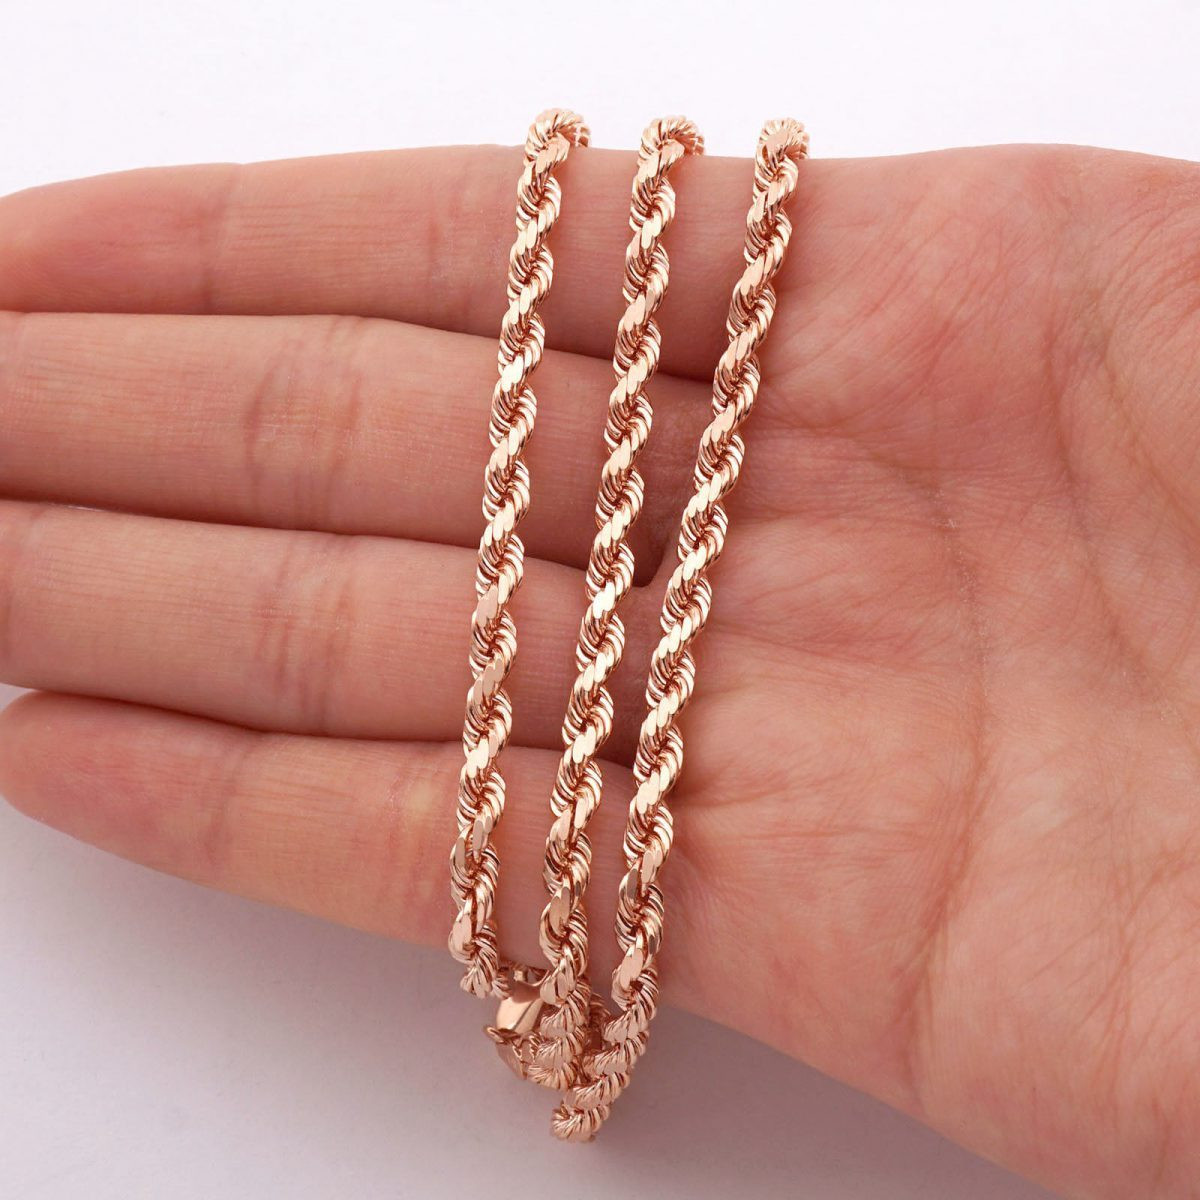 Rose Gold Chain Necklace
 Solid 14k Rose Gold Diamond Cut Rope Chain Necklace 2mm